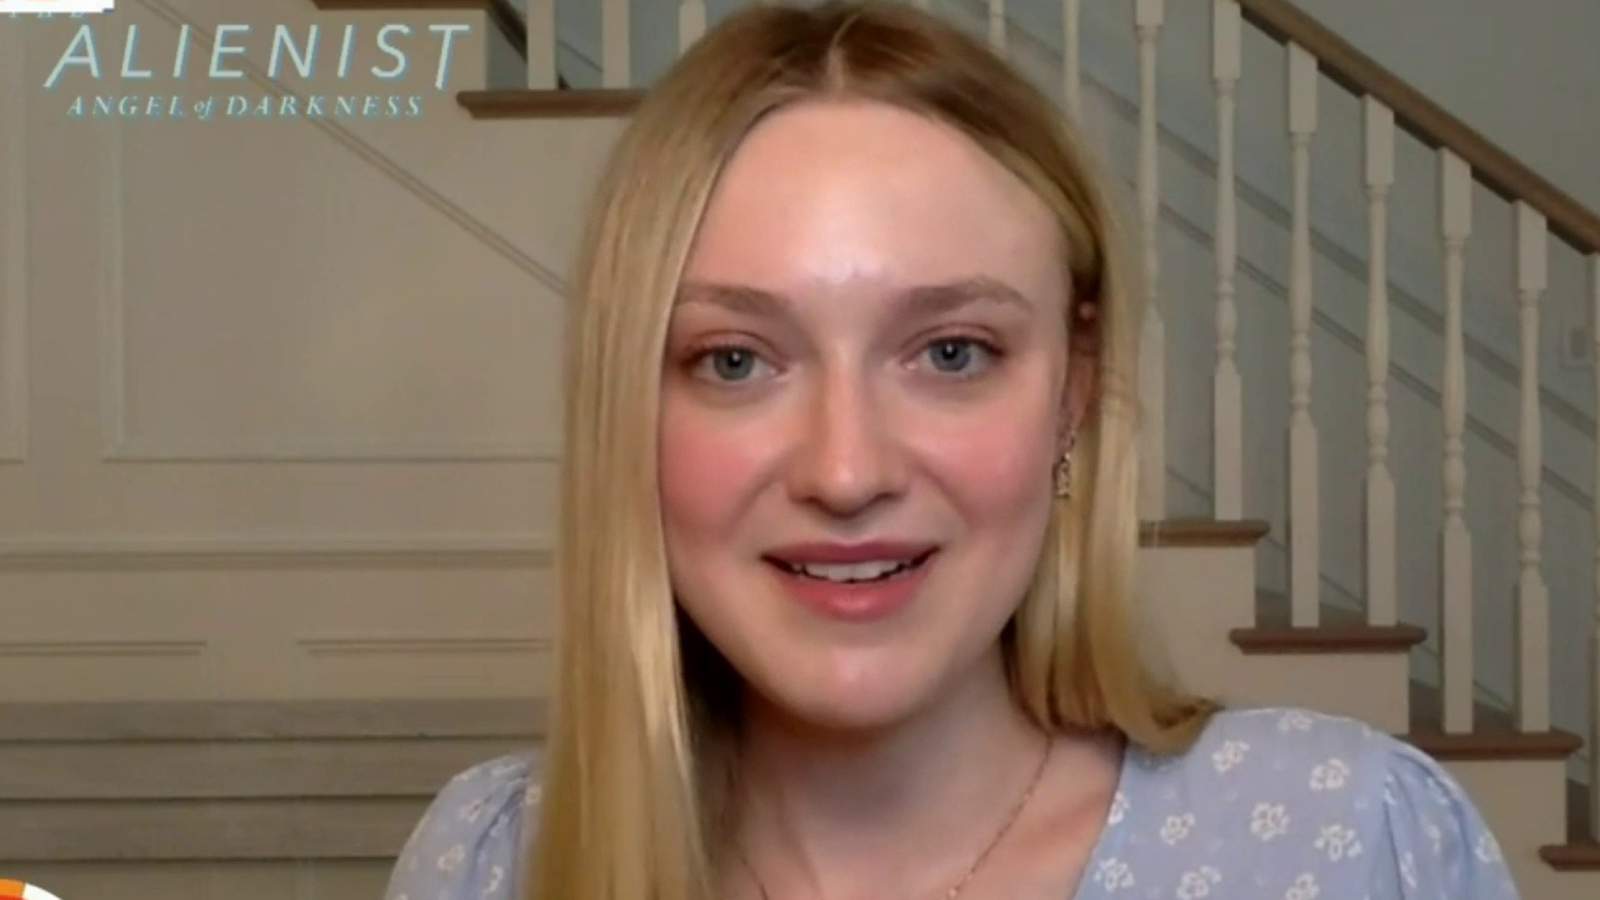 Dakota Fanning talks about her new show, a sequel to The Alienist